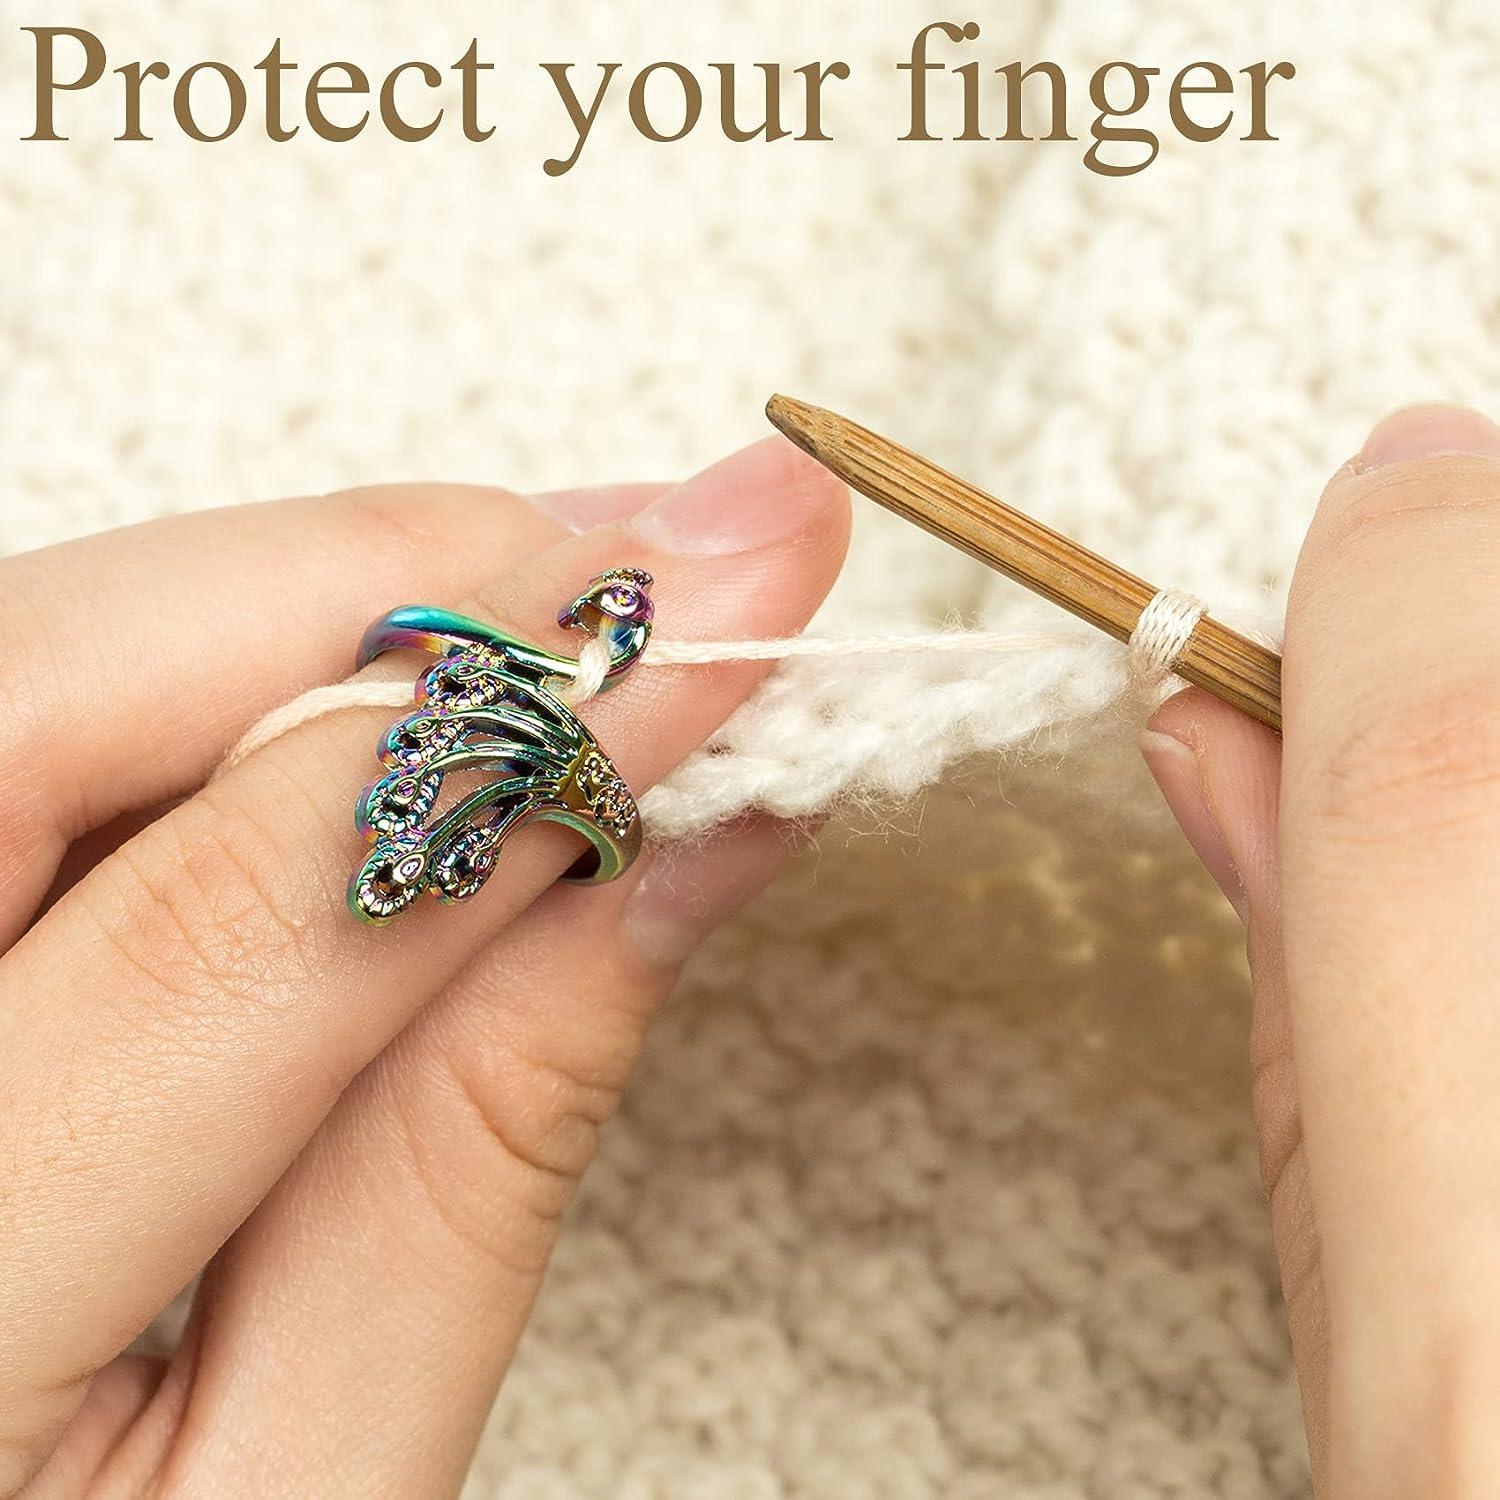 Adjustable Knitting Loop Crochet Loop Knitting Accessories Knitting Ring  Adjust Finger Wear Thimble Yarn Guides Knitted Ring